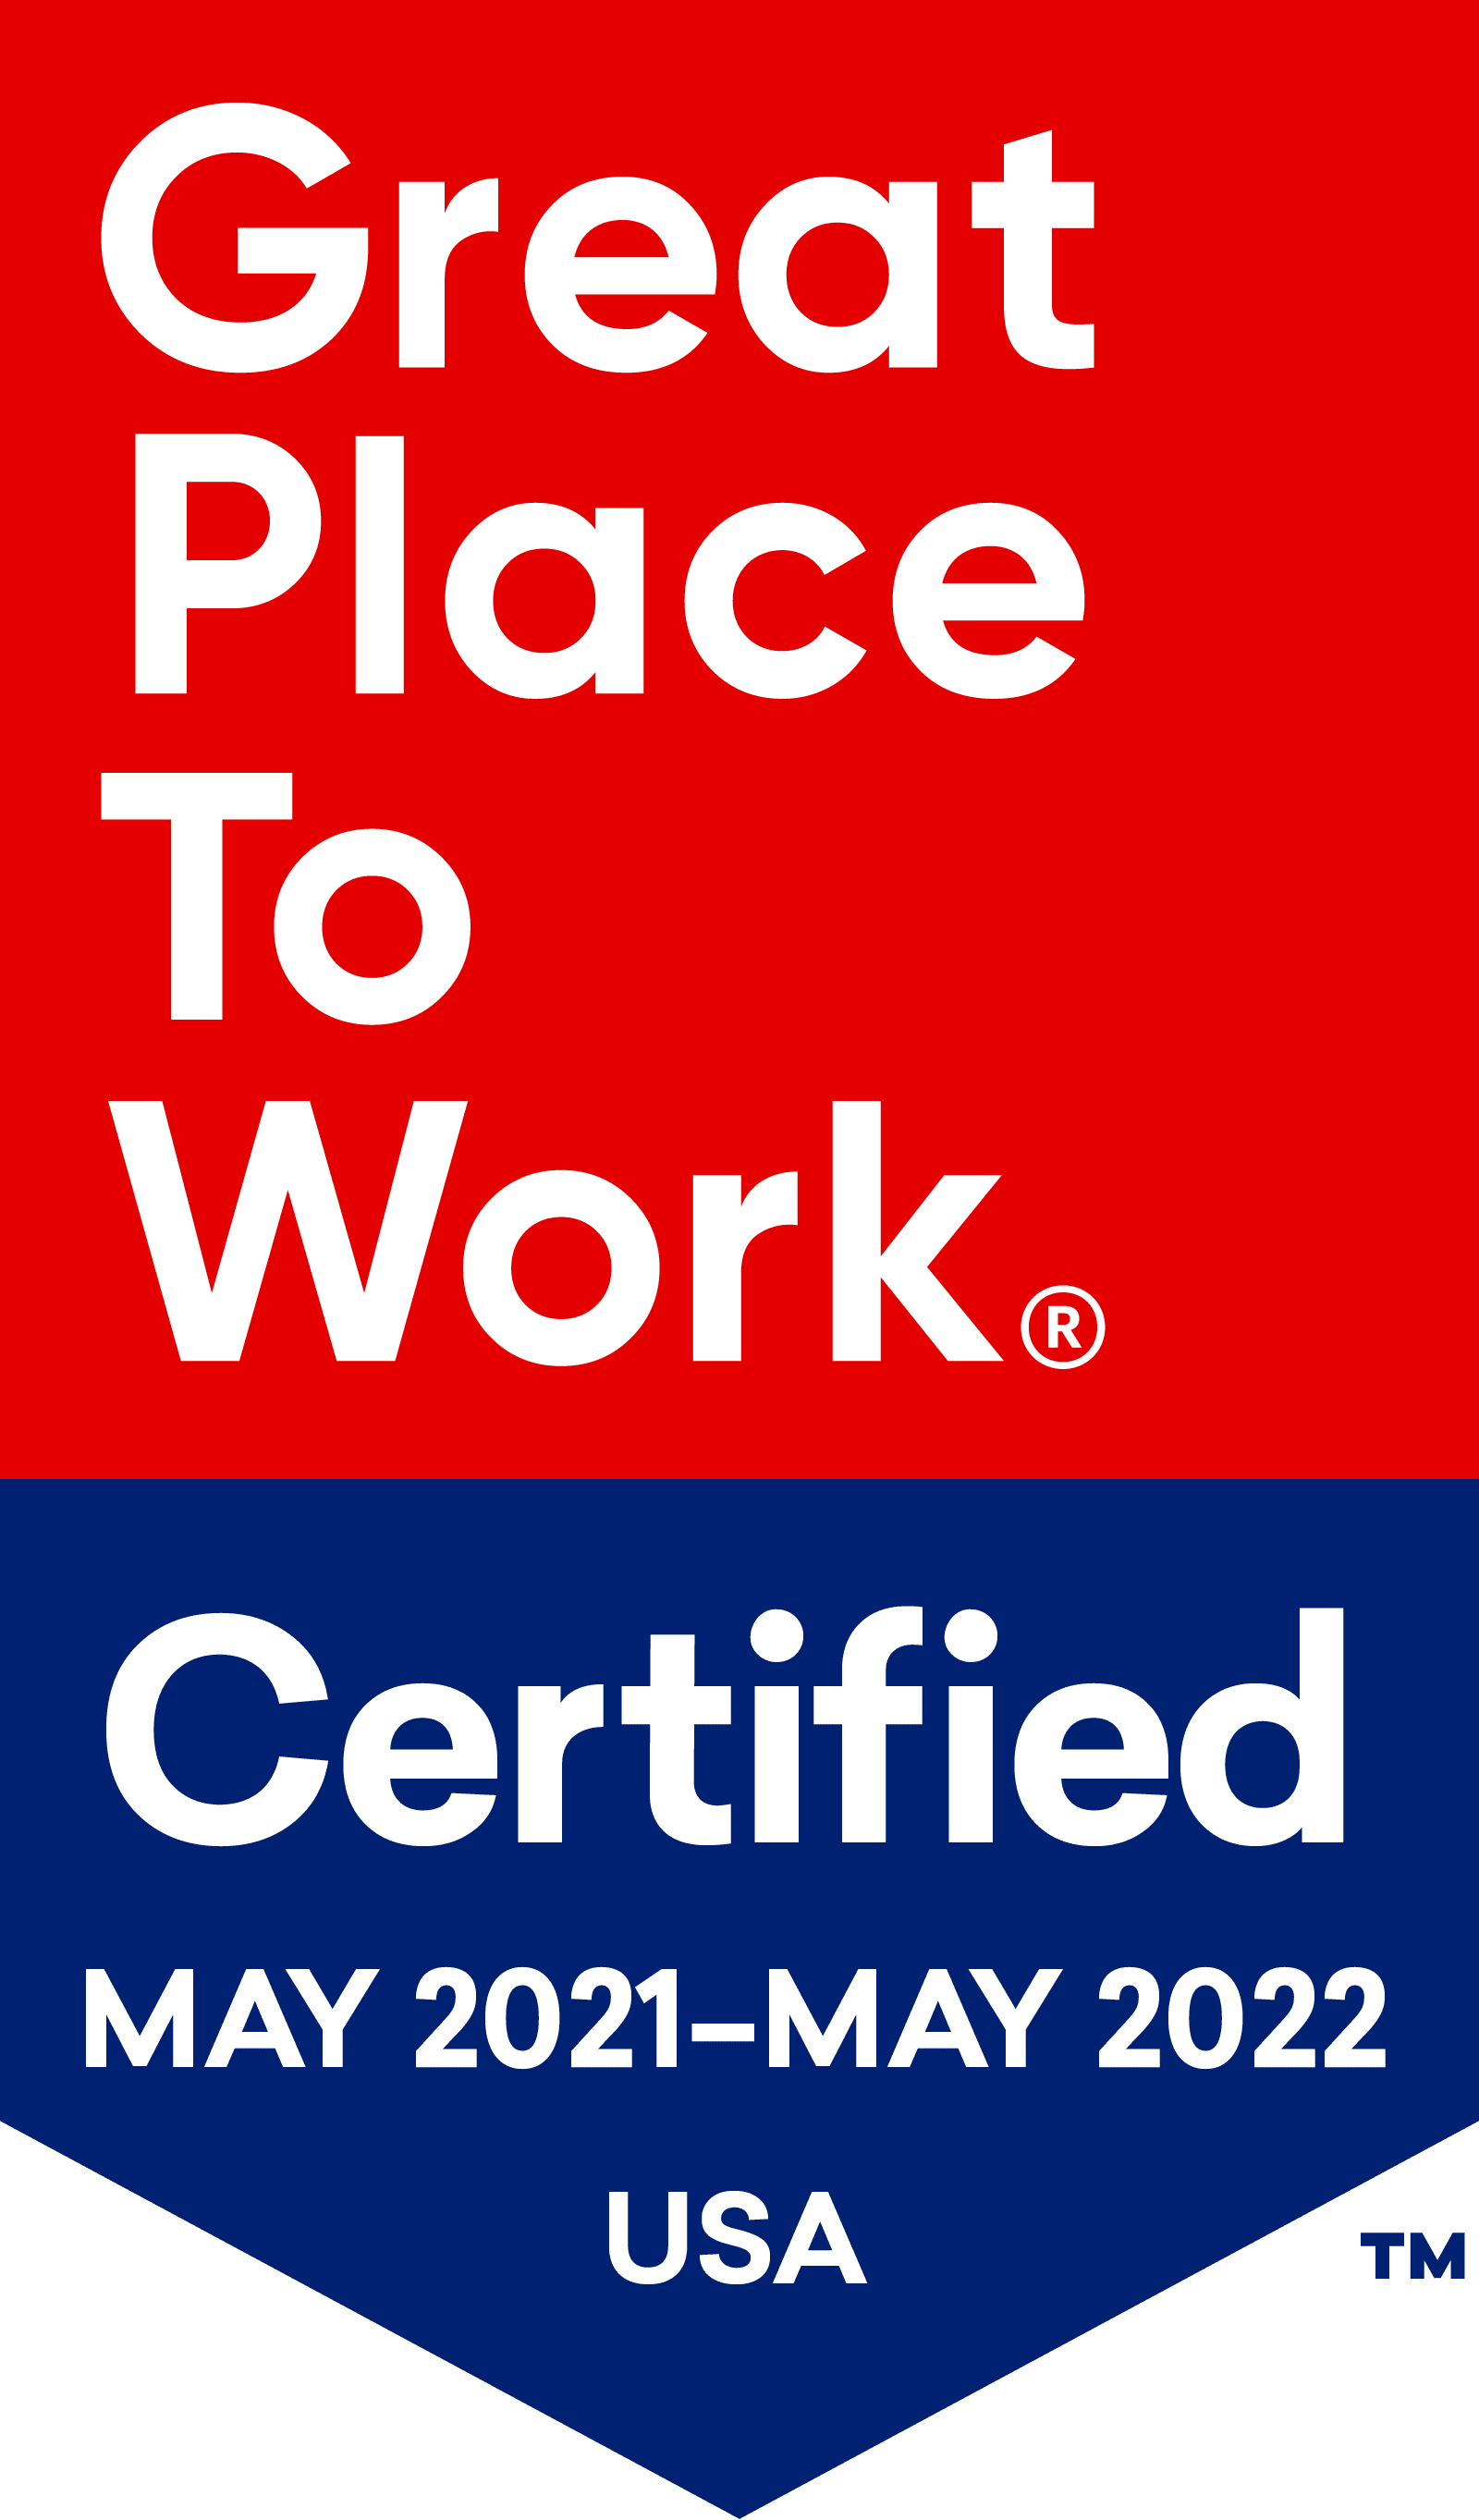 The Montera is Great Place To Work Certified